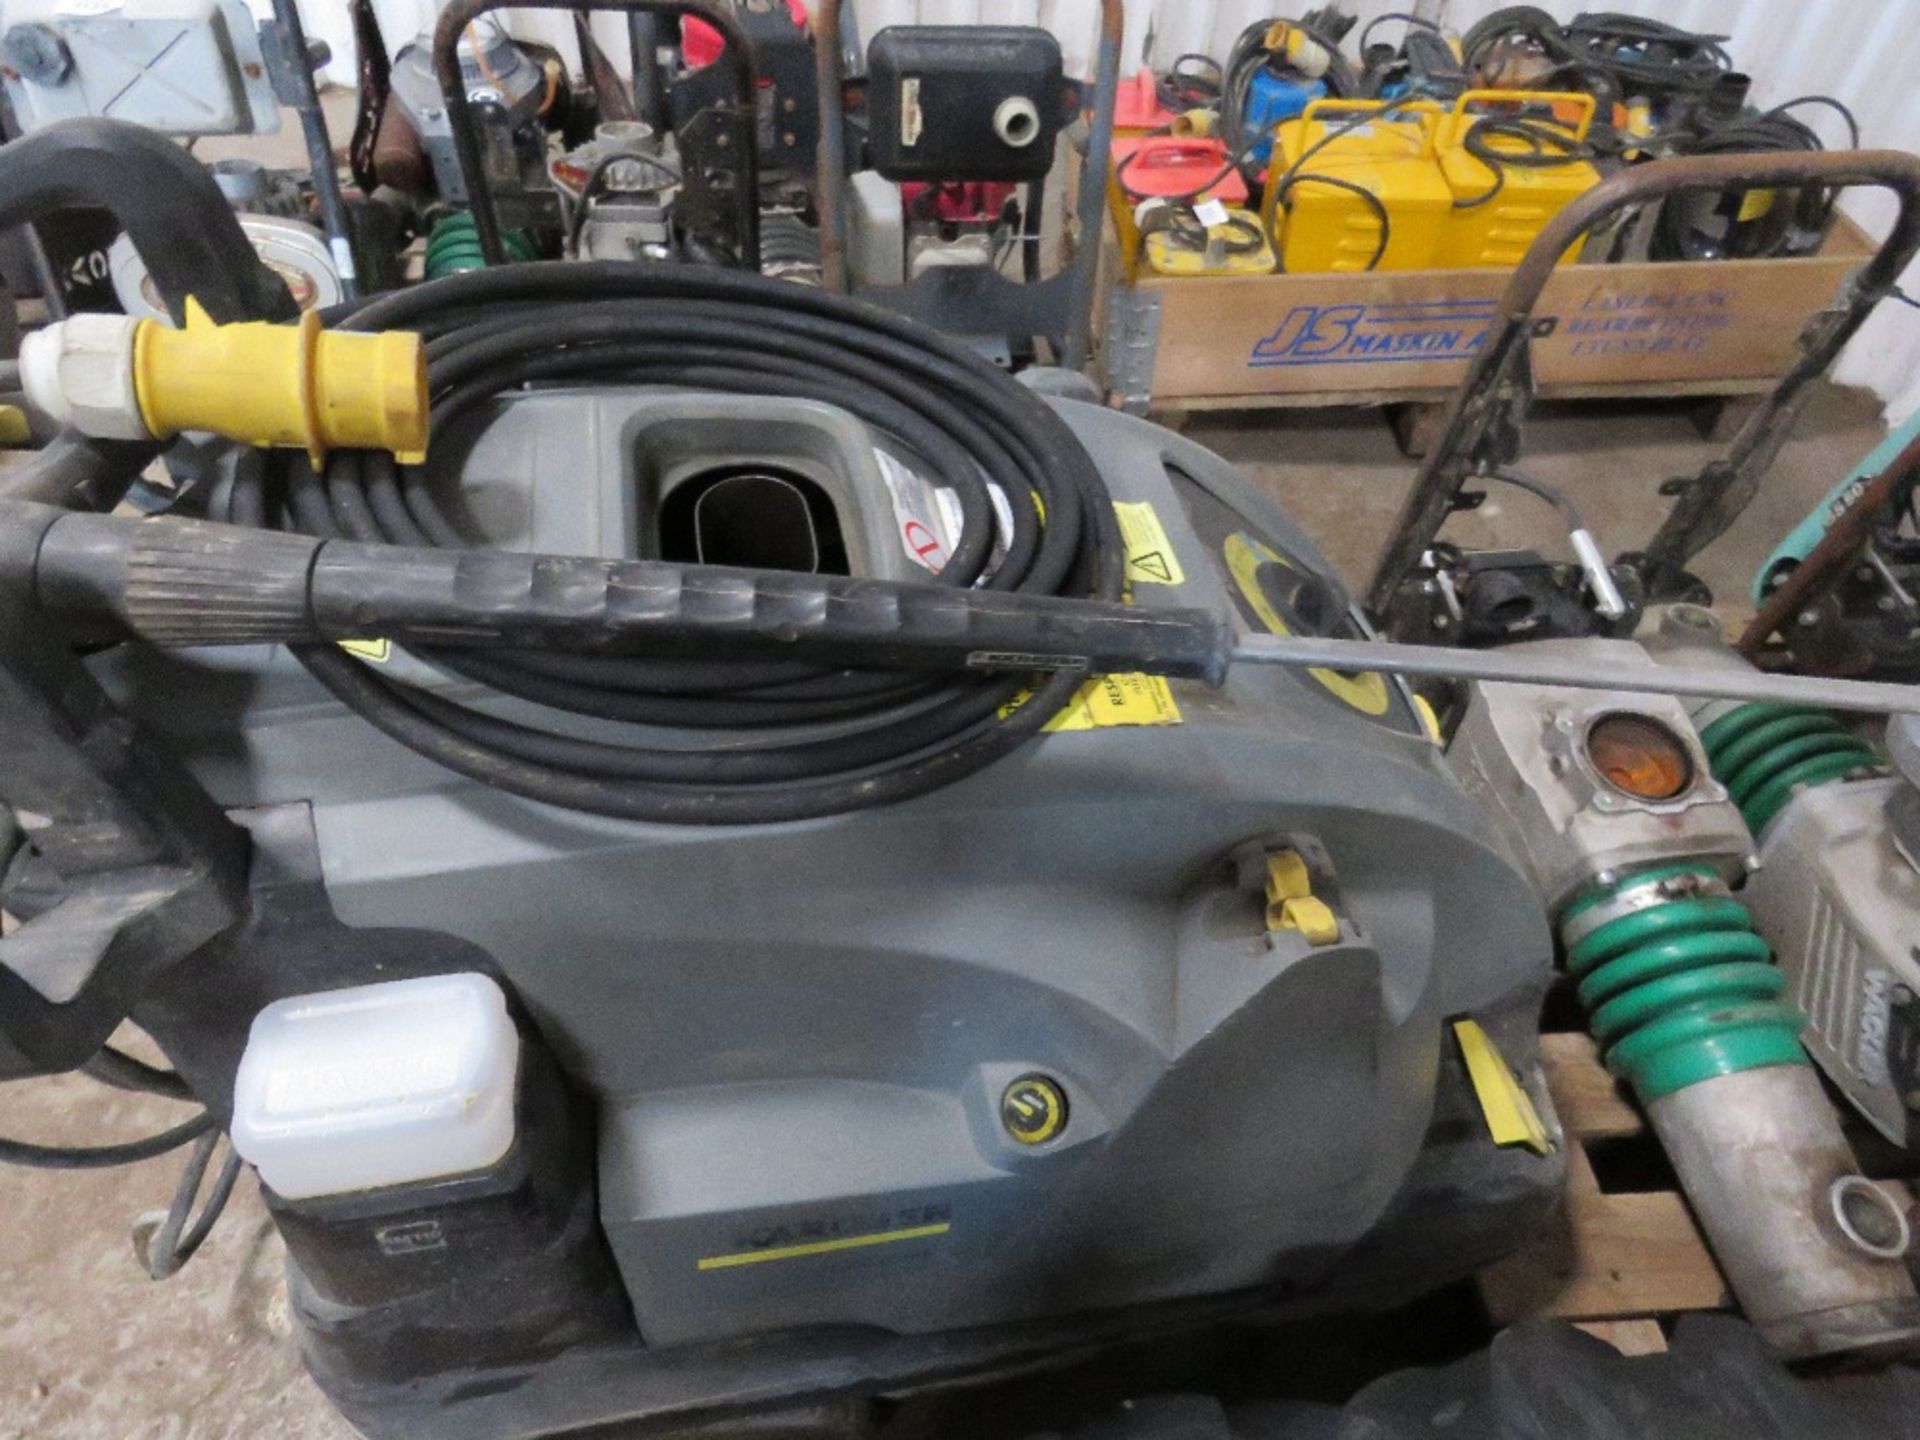 KARCHER HDS 6110C 110VOLT STEAM CLEANER. YEAR 2014, UNTESTED, CONDITION UNKNOWN All items "sold as - Image 2 of 3